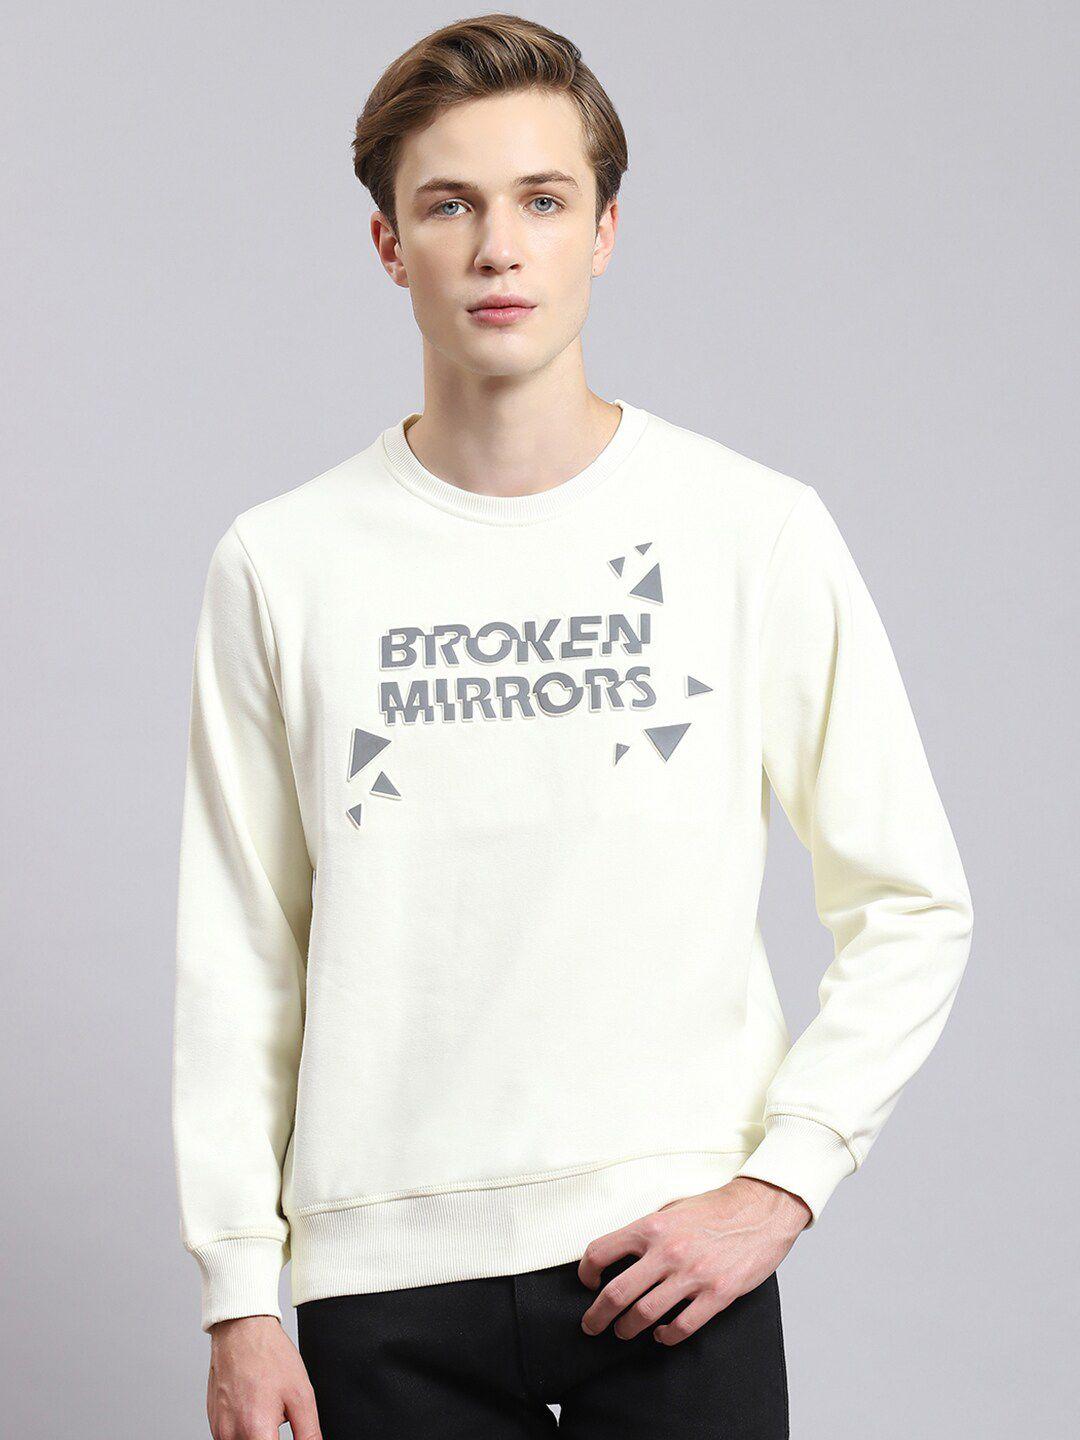 monte carlo typography printed pullover